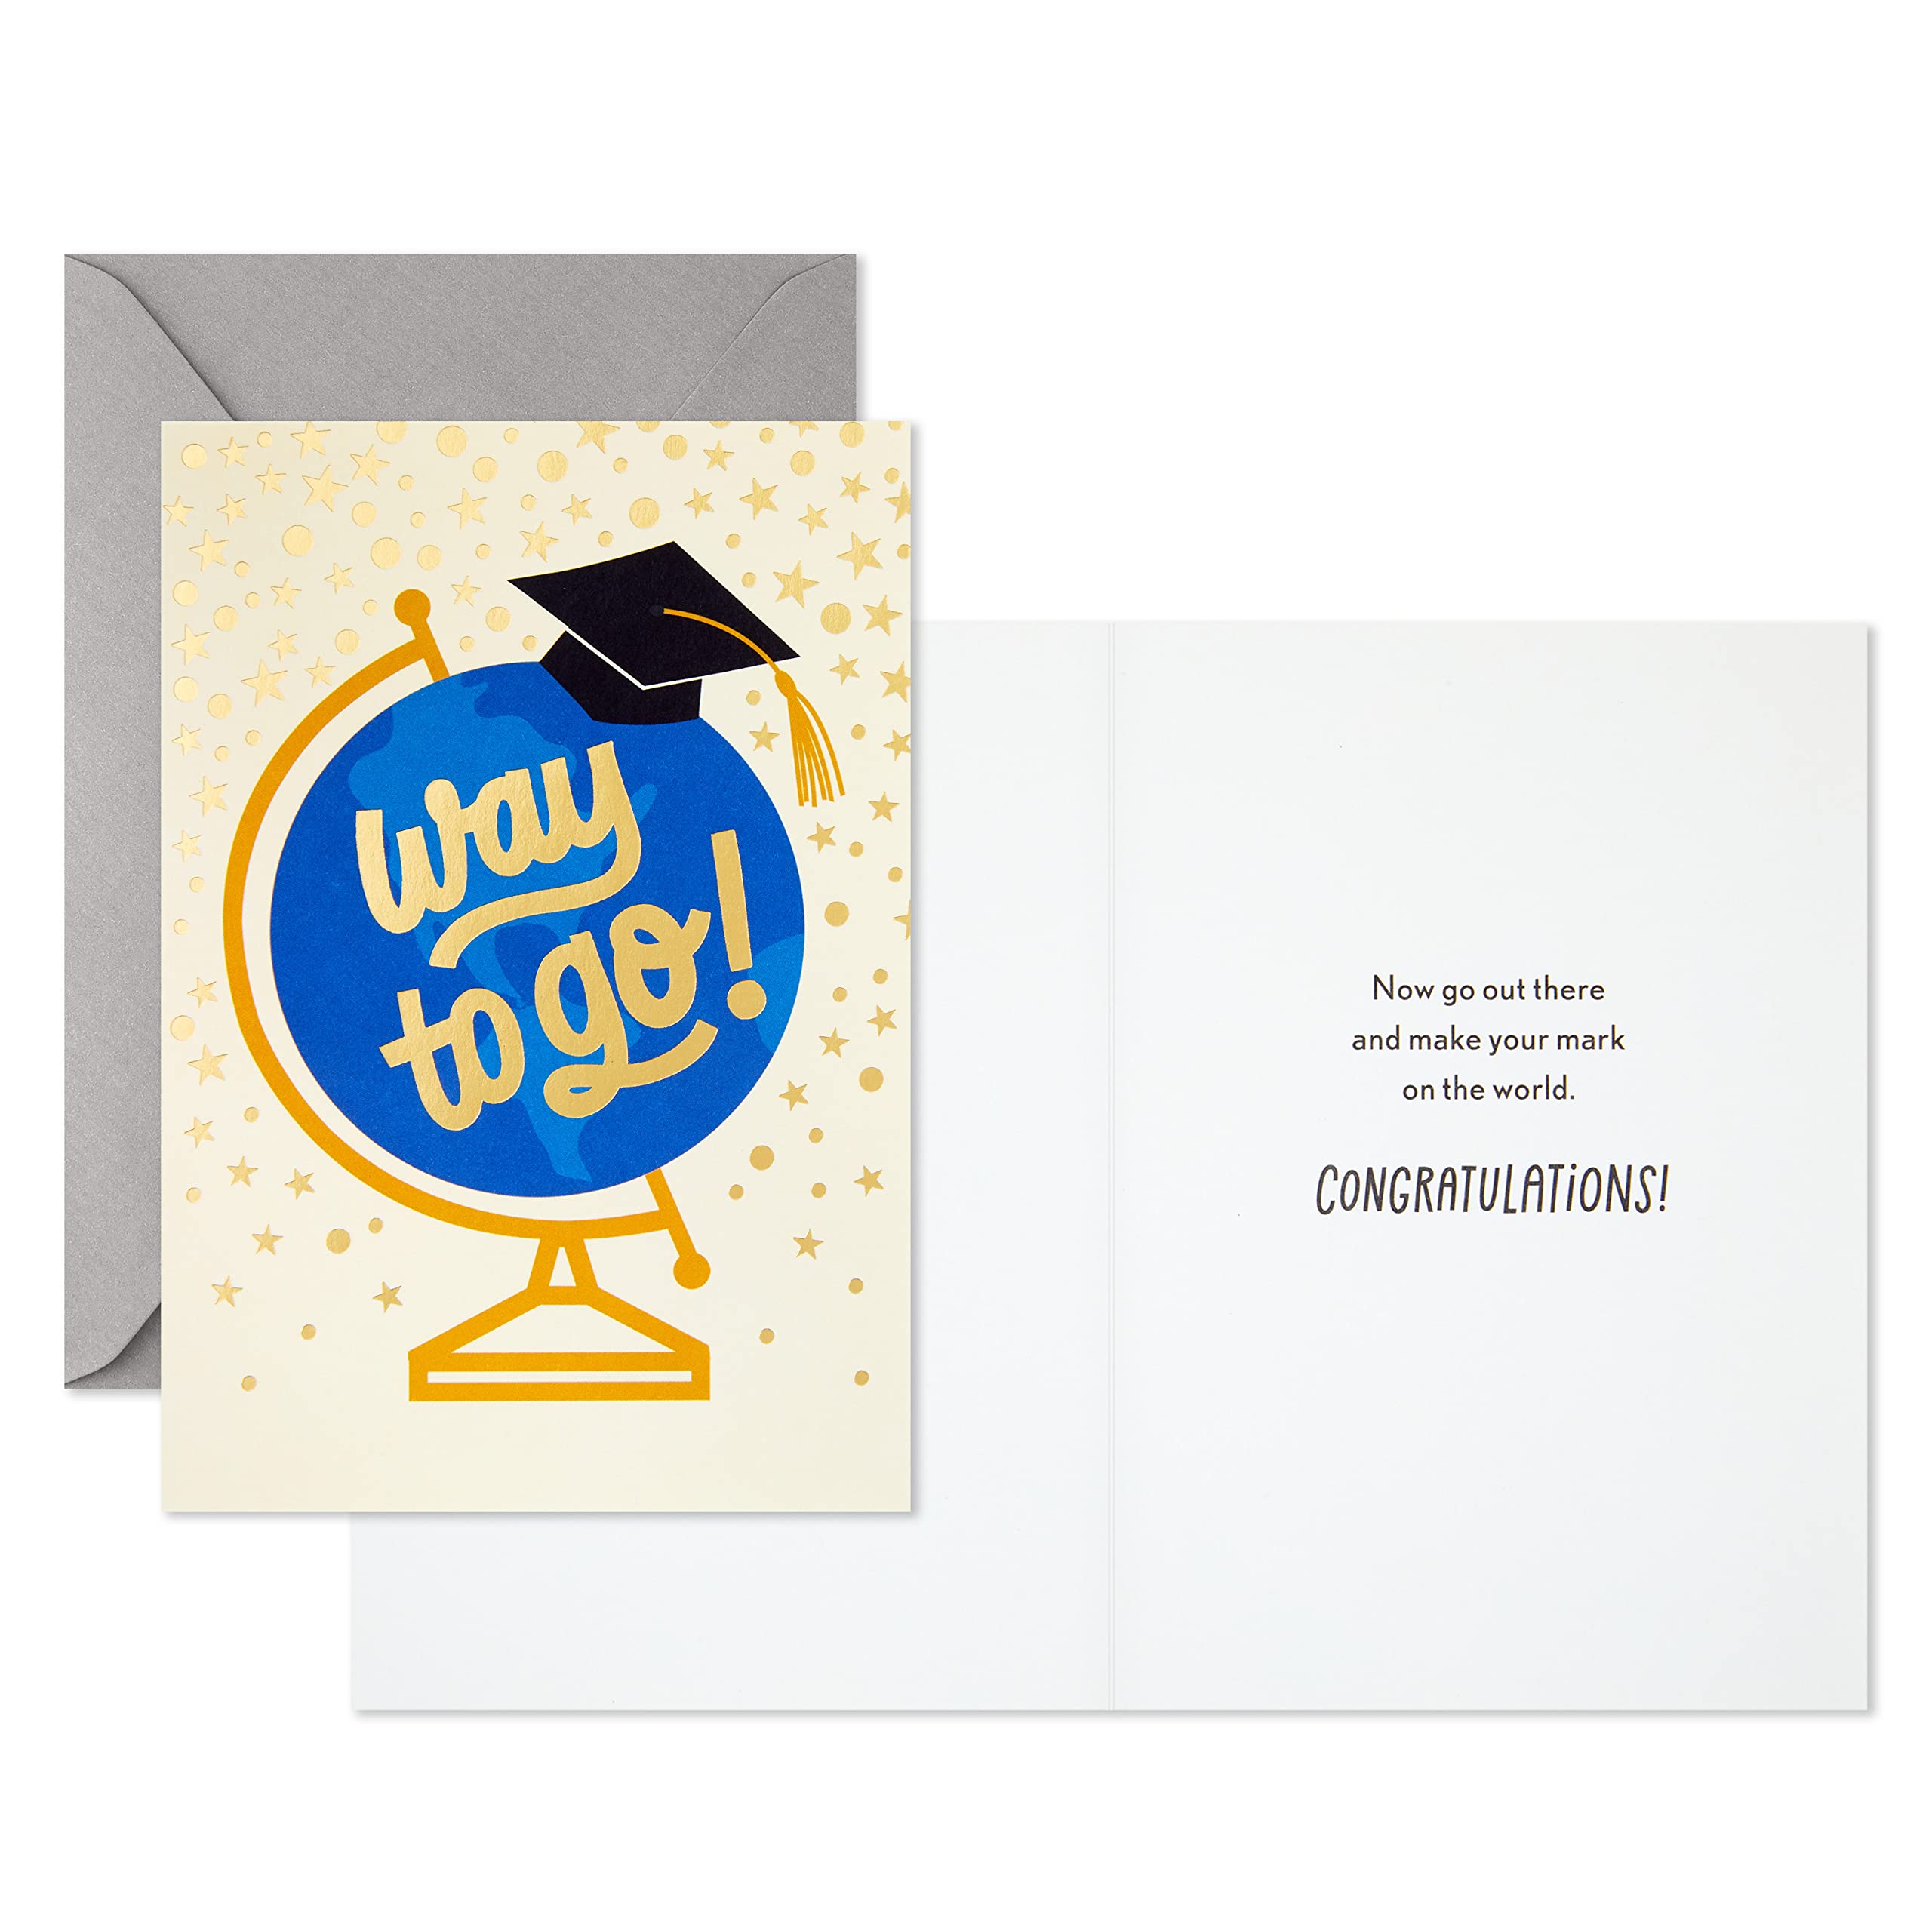 Hallmark Pack of 10 Graduation Cards with Envelopes (Way to Go)